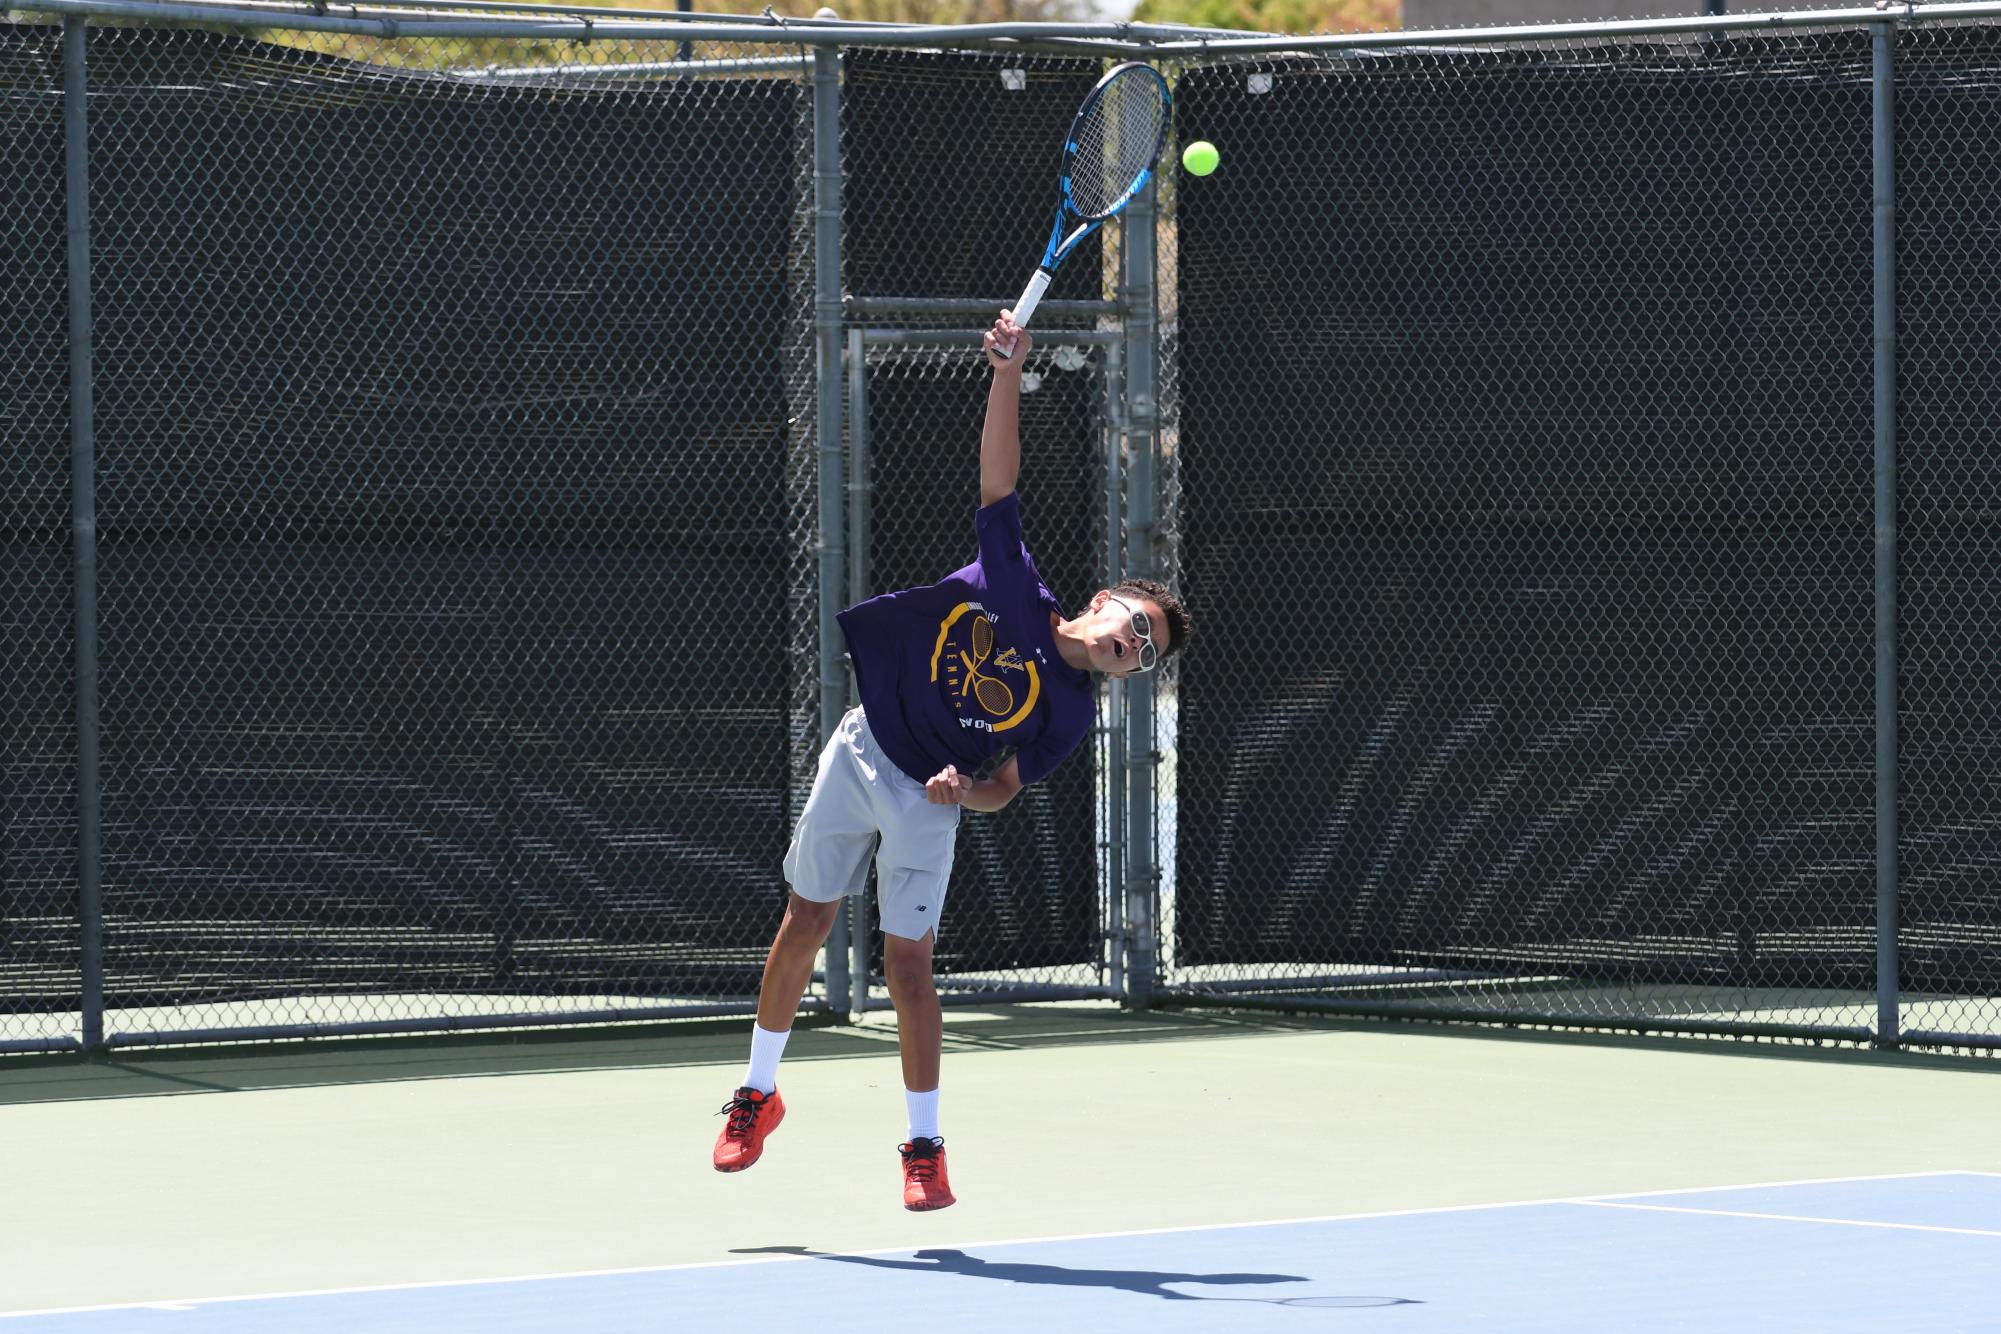 Freshman+Dashel+Parkinson-Lubold+and+Sophomore+Fan+Jia+dominate+annual+Mens+EBAL+Doubles+Tennis+Championship+Winning+First+Place+%F0%9F%A5%87